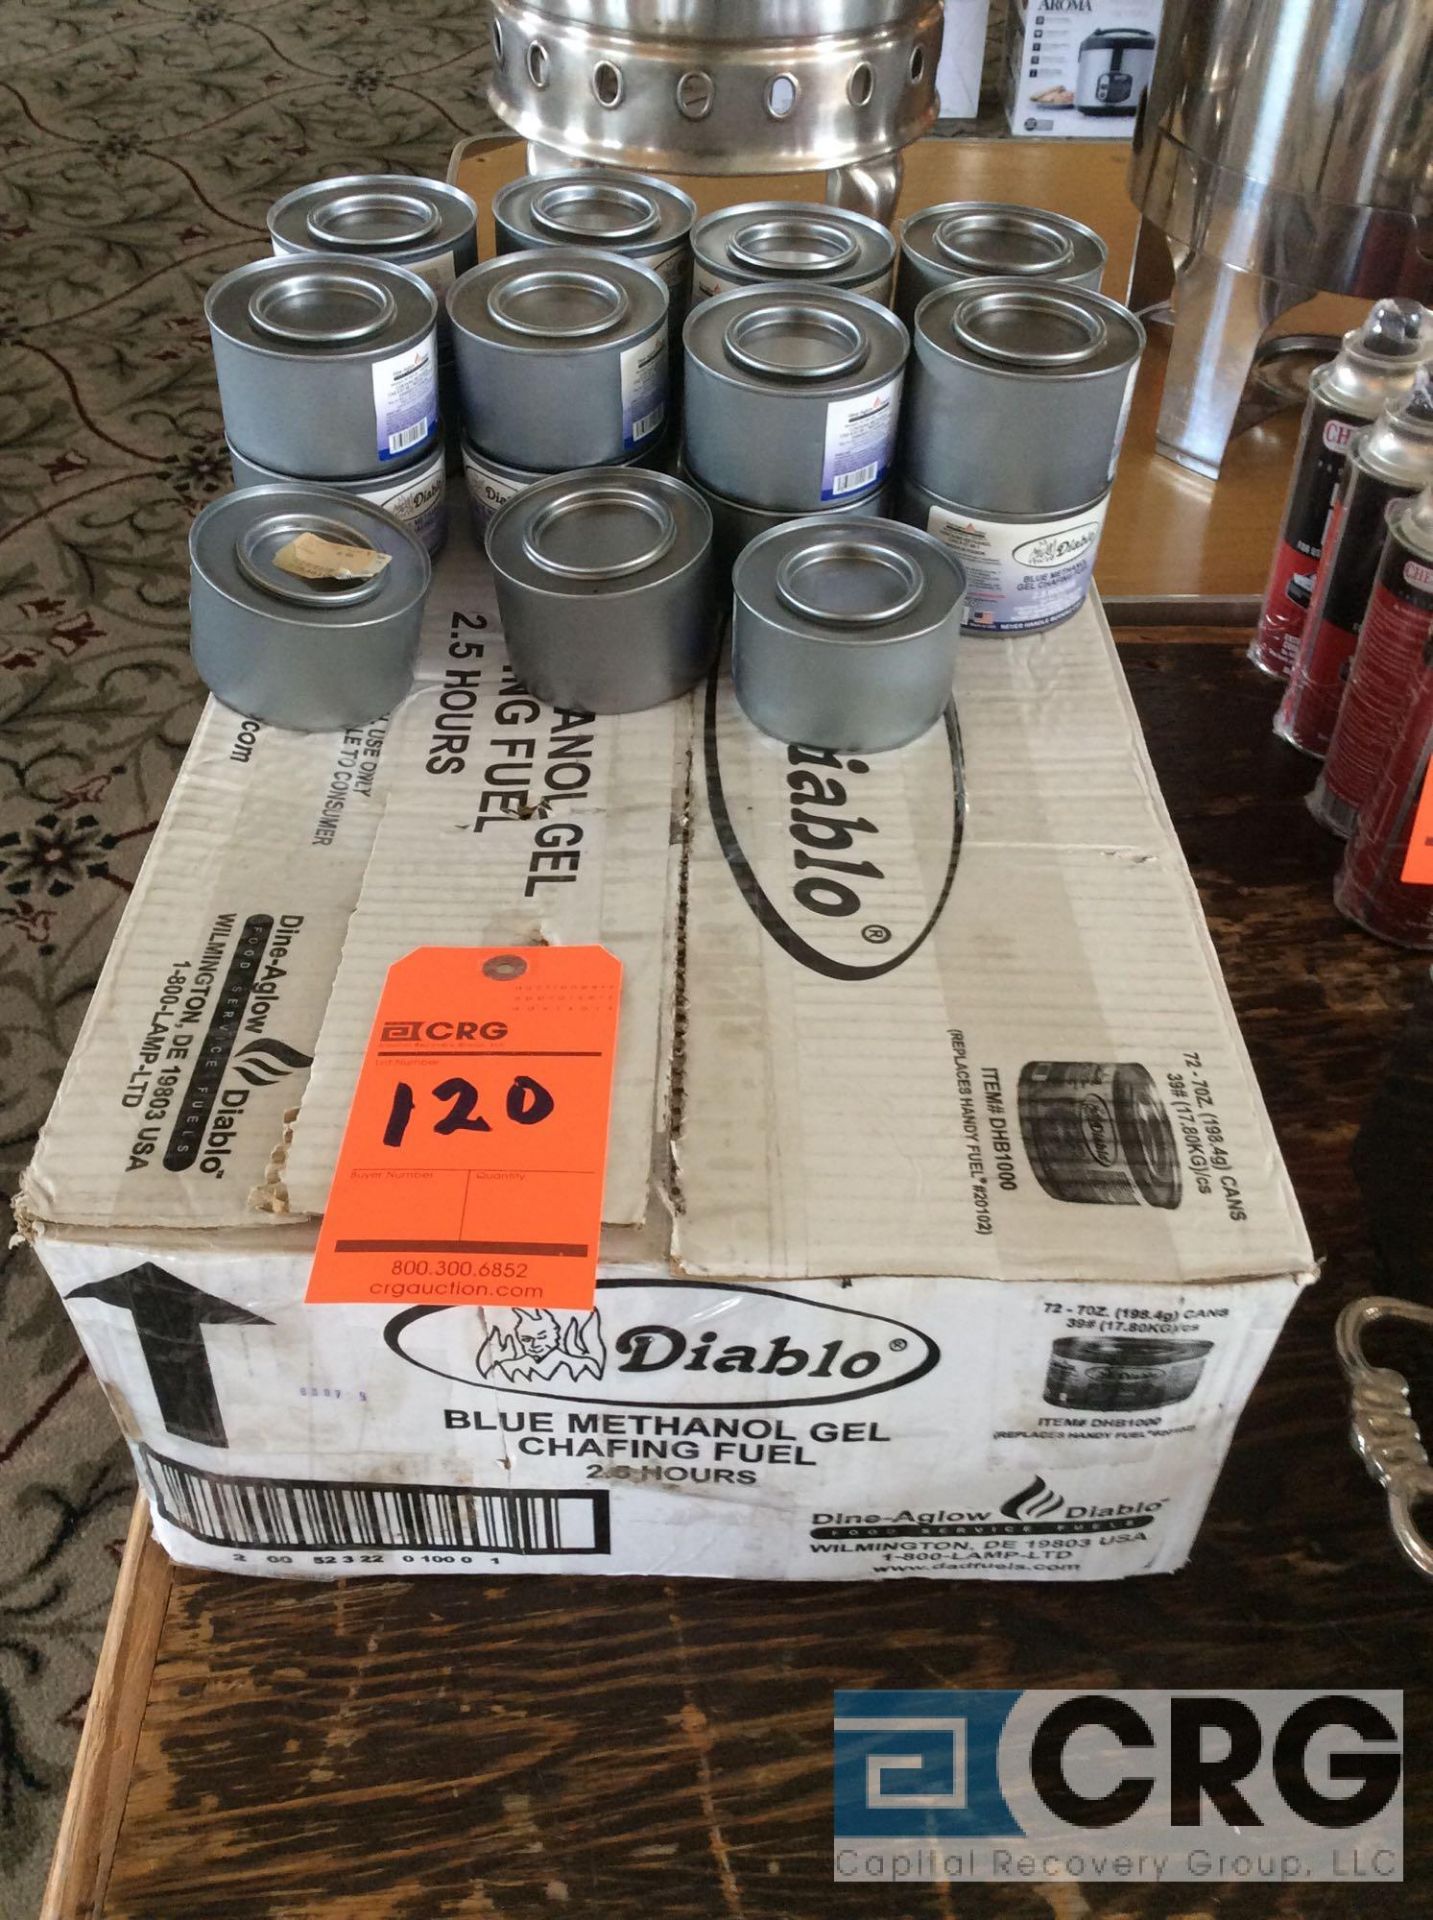 Lot of (90) Diablo blue methanol chafing dish fuel cans, 2.5 hours